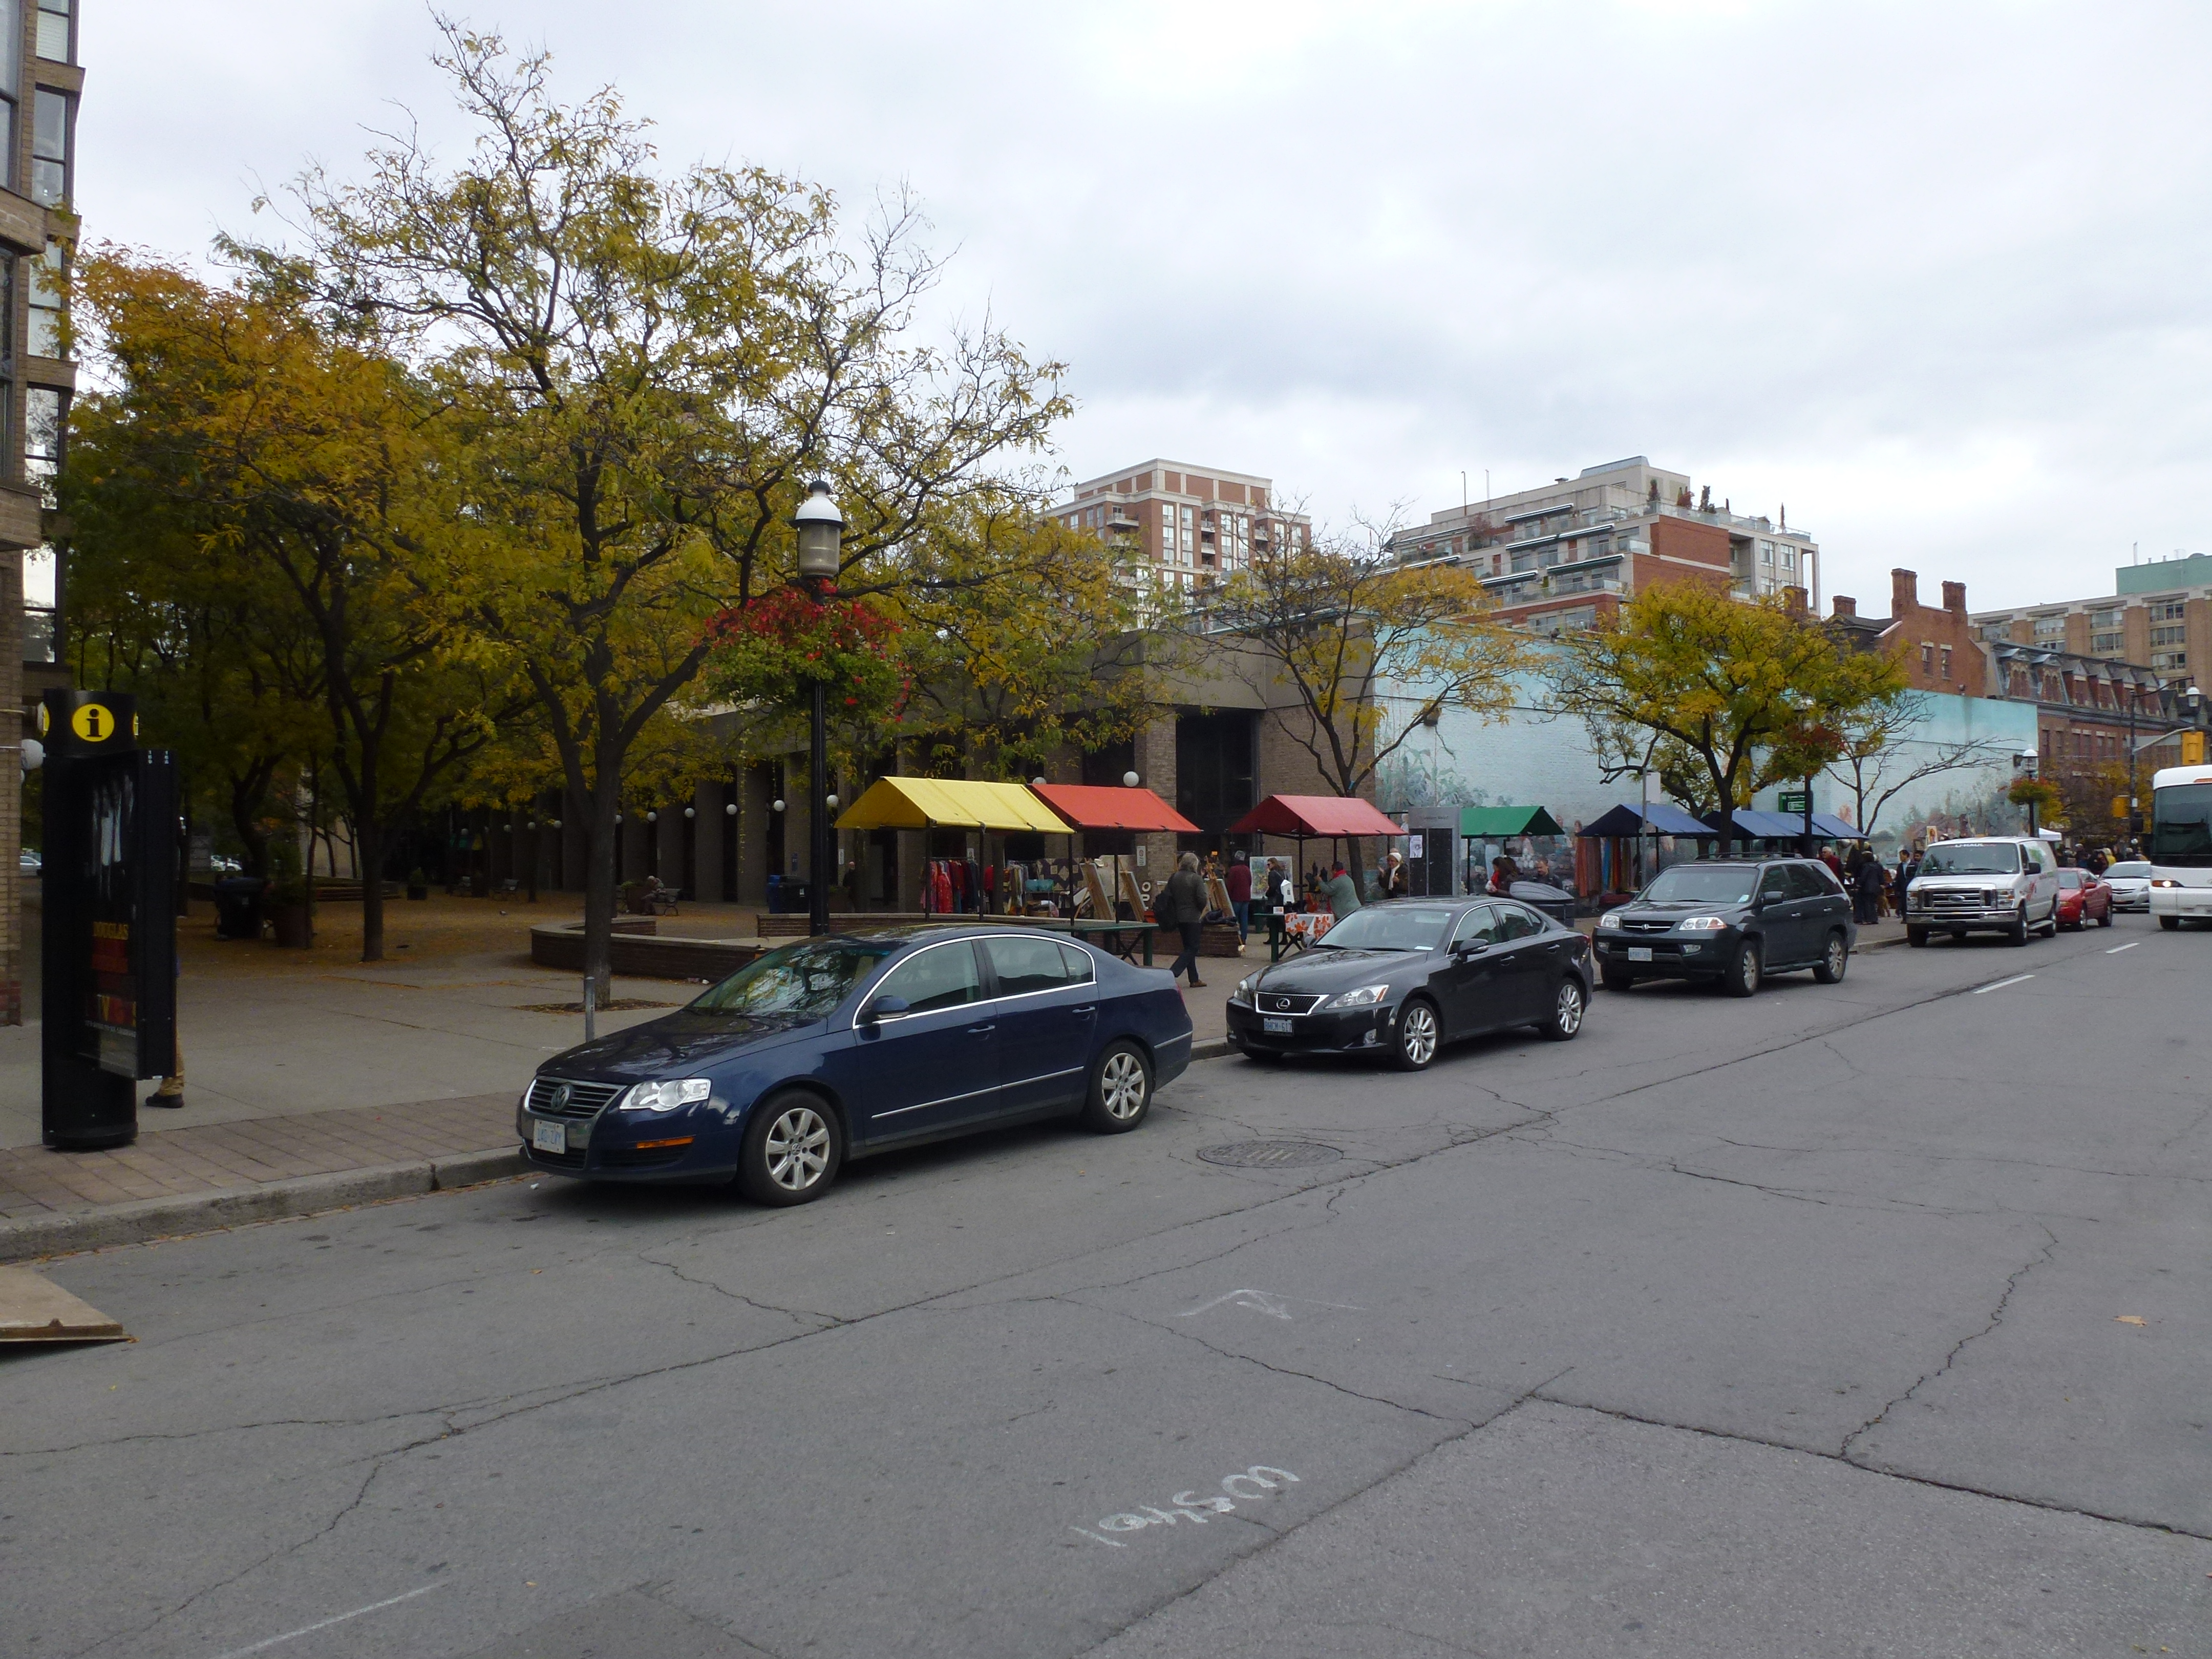 St lawrence market, north building, 2013 10 27 (2) photo